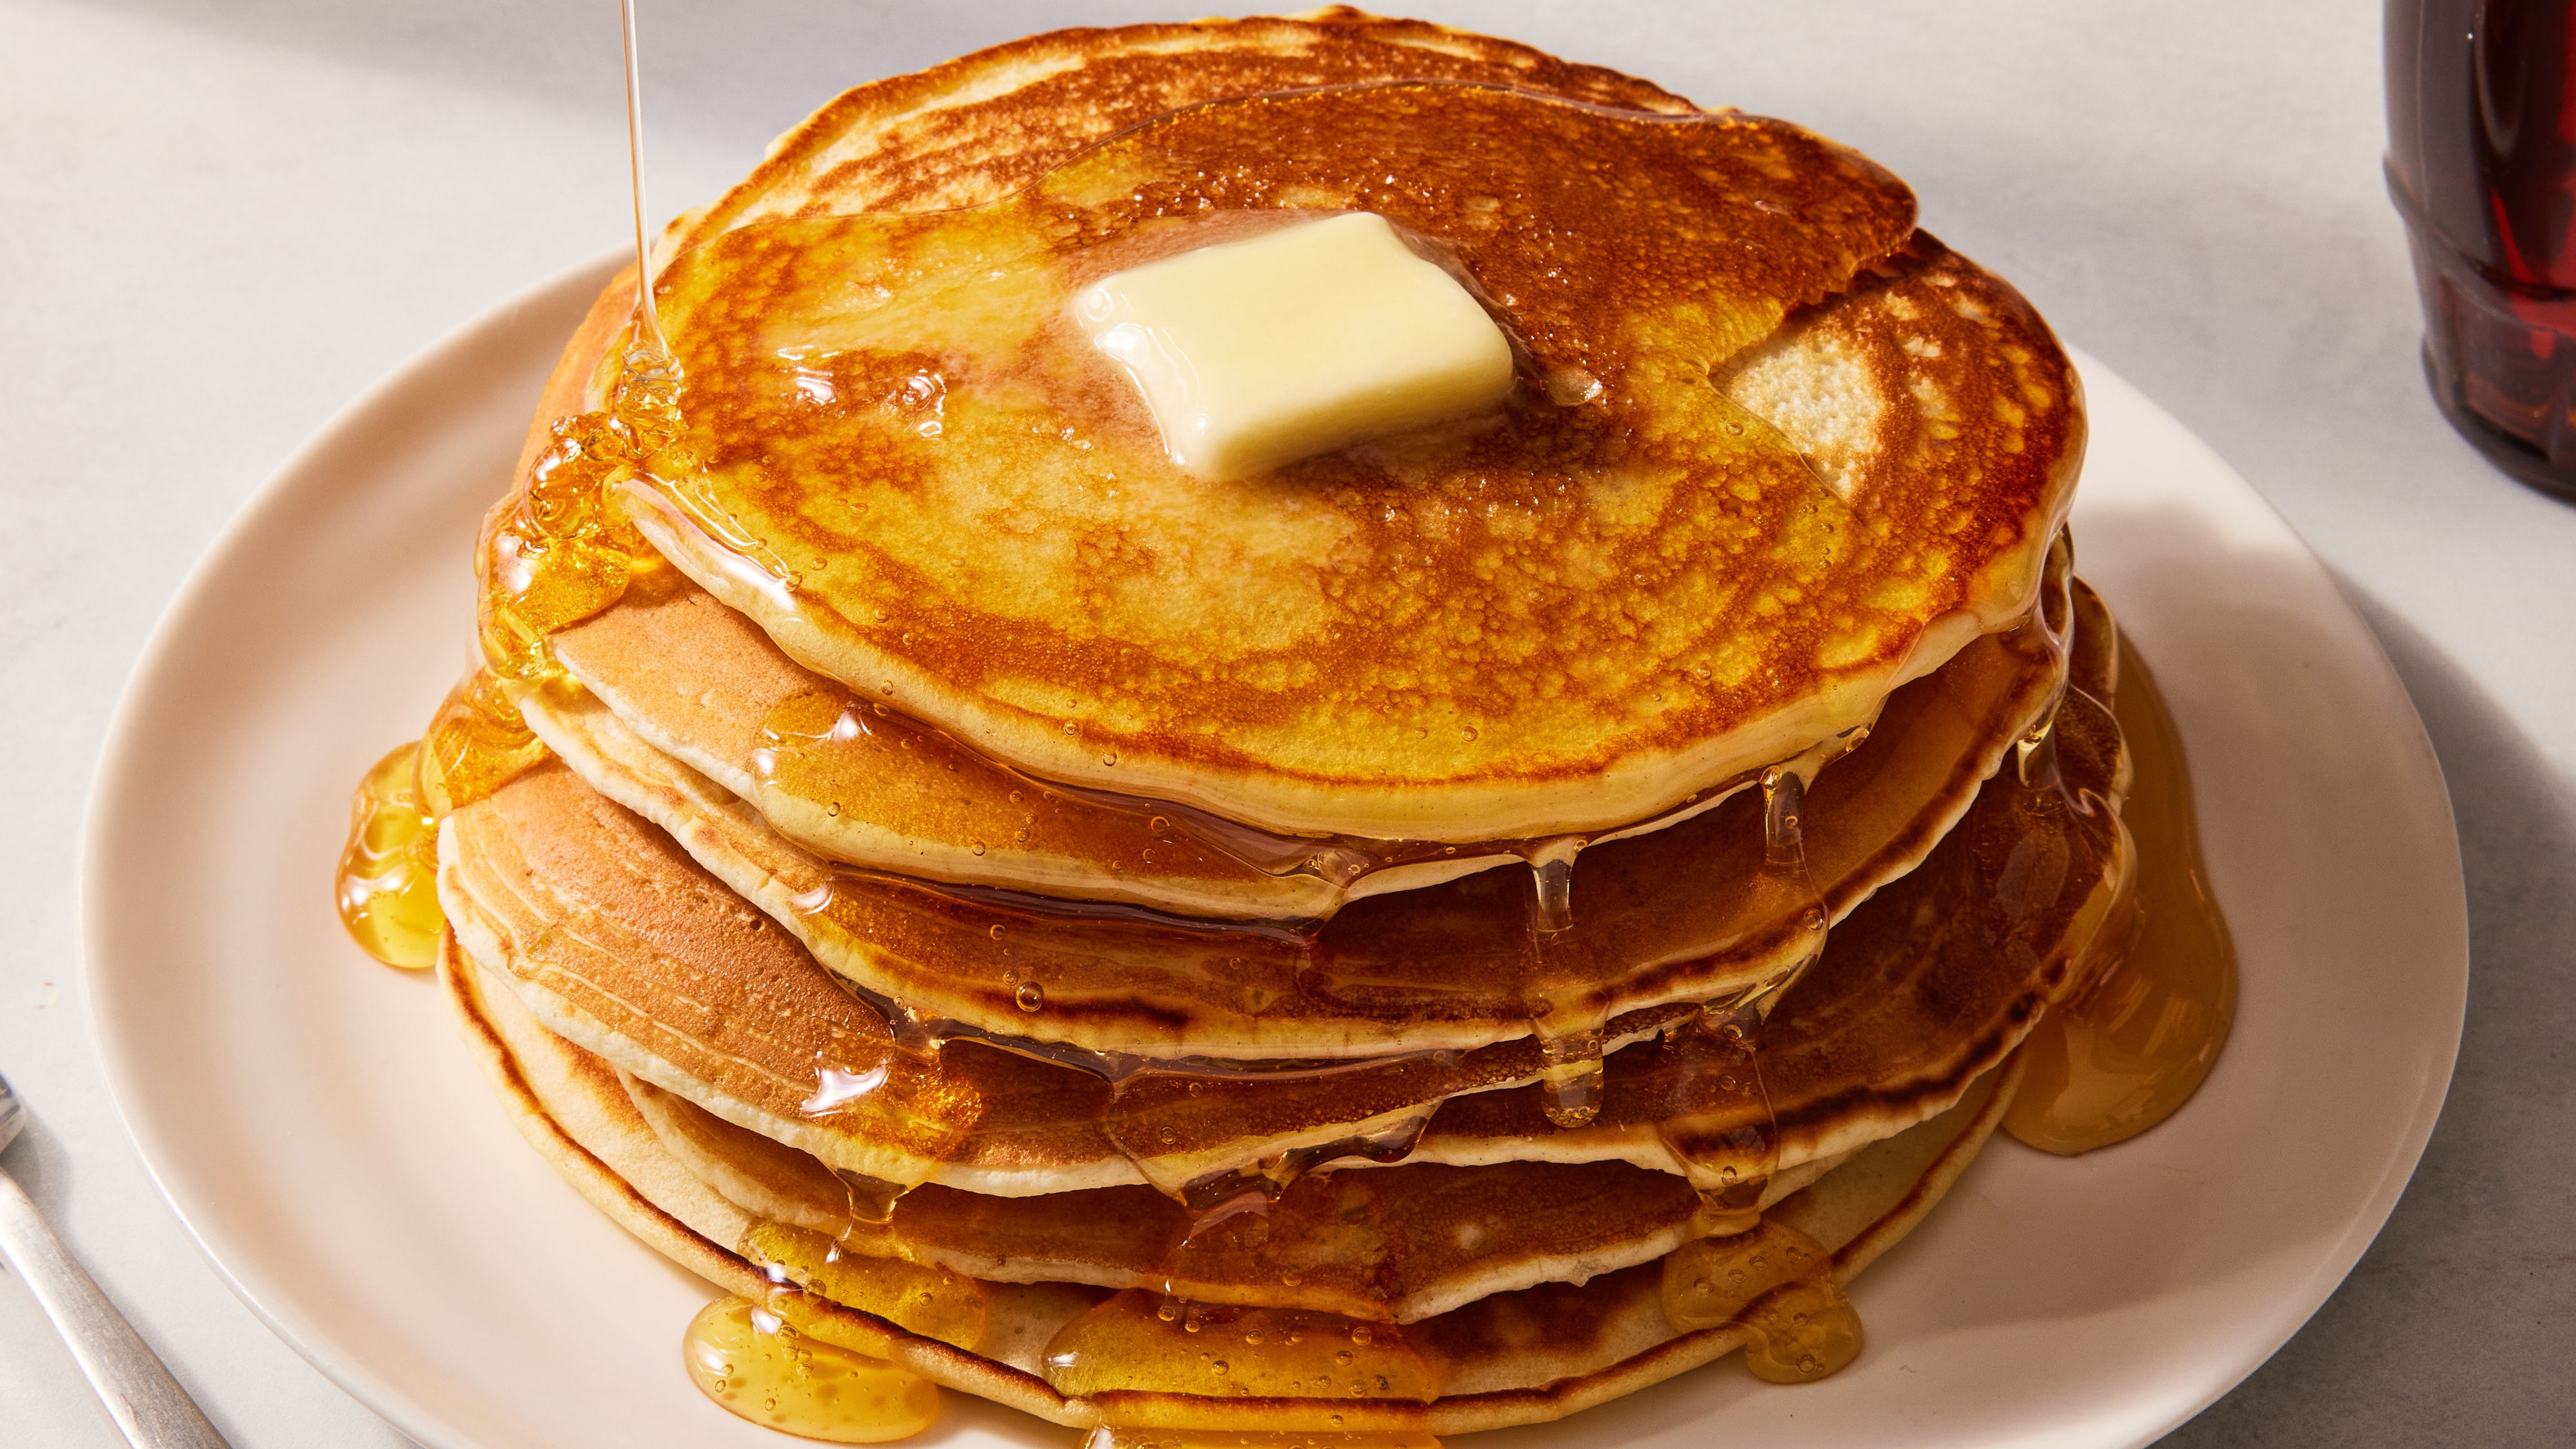 What's the perfect griddle temperature for making pancakes?